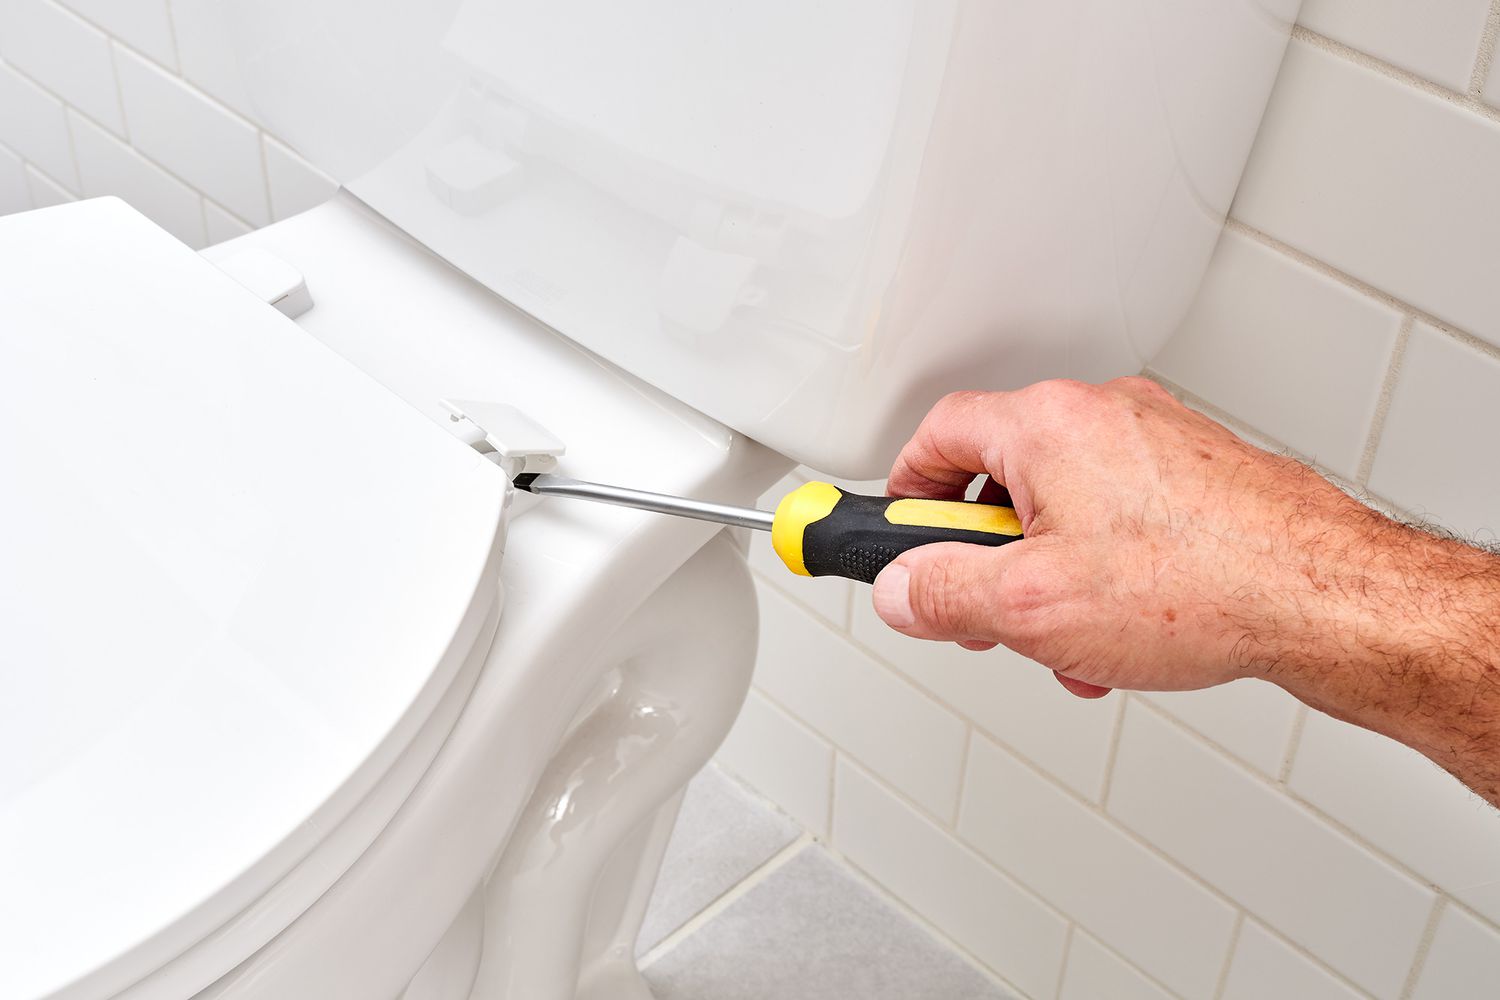 How To Fix A Loose Toilet Bowl